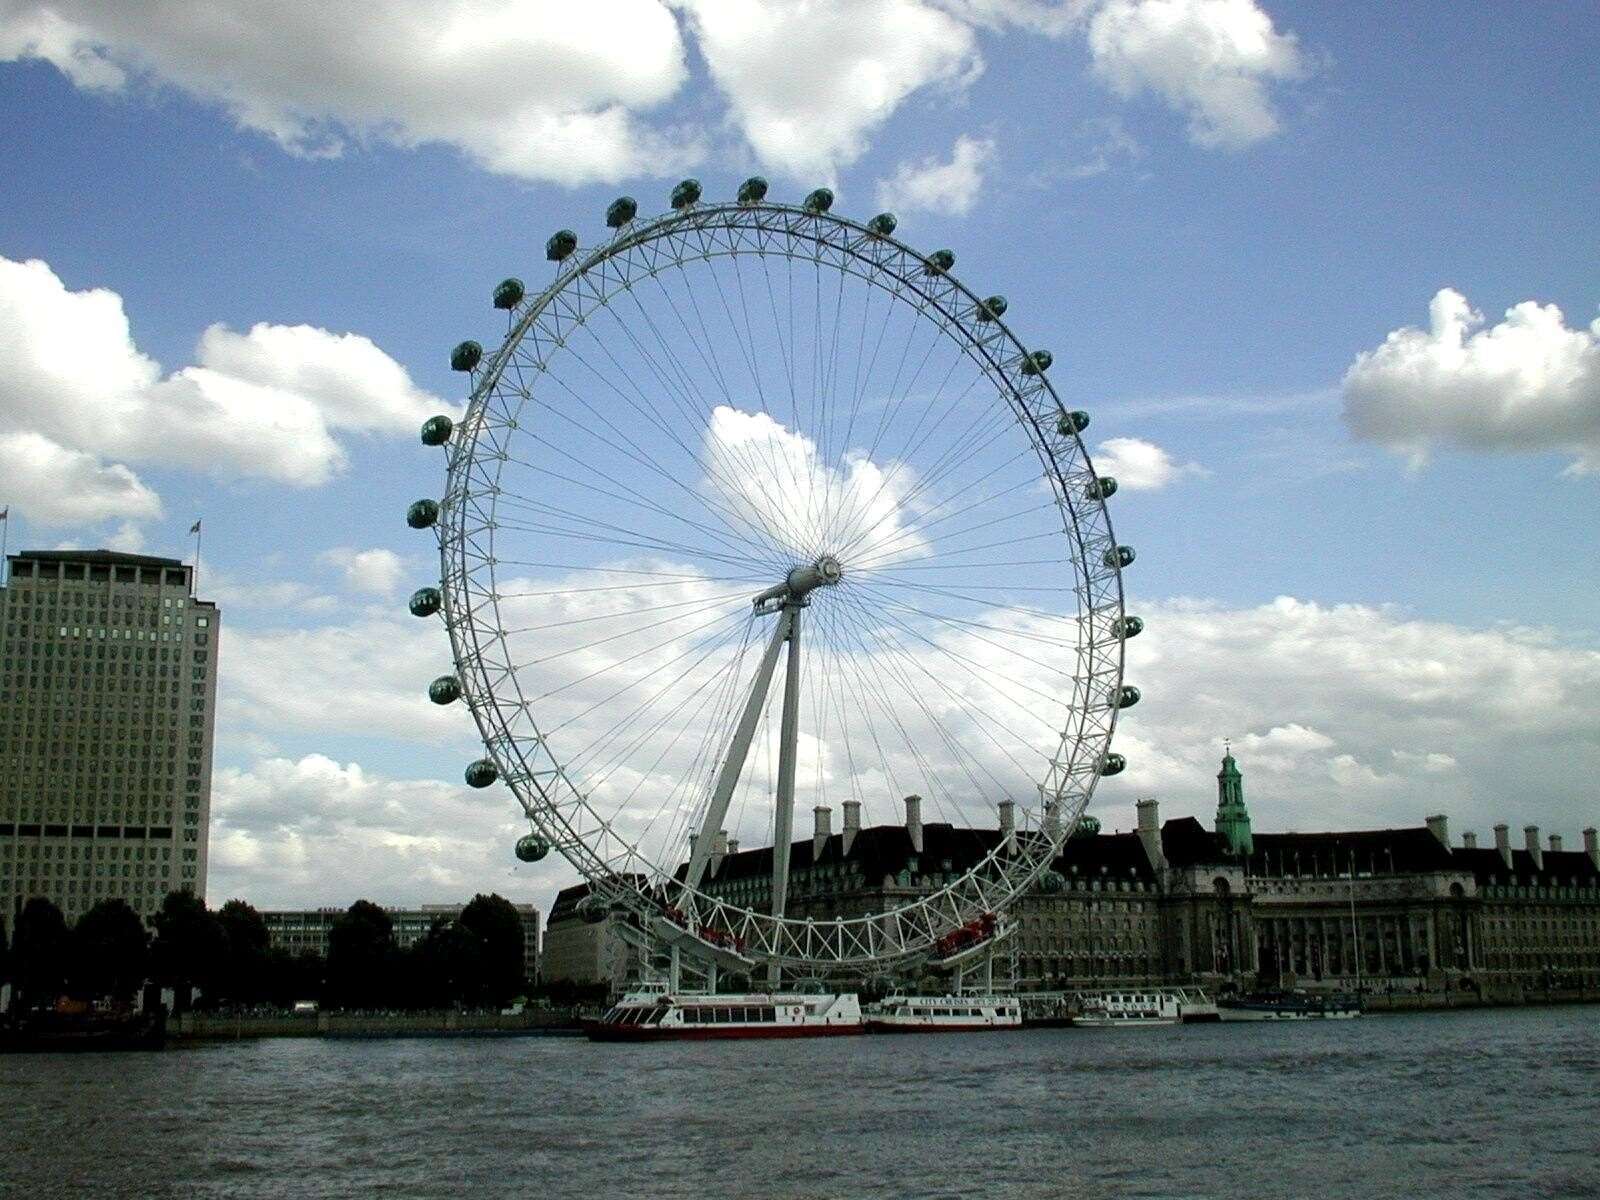 The team's challenge finished at the London Eye